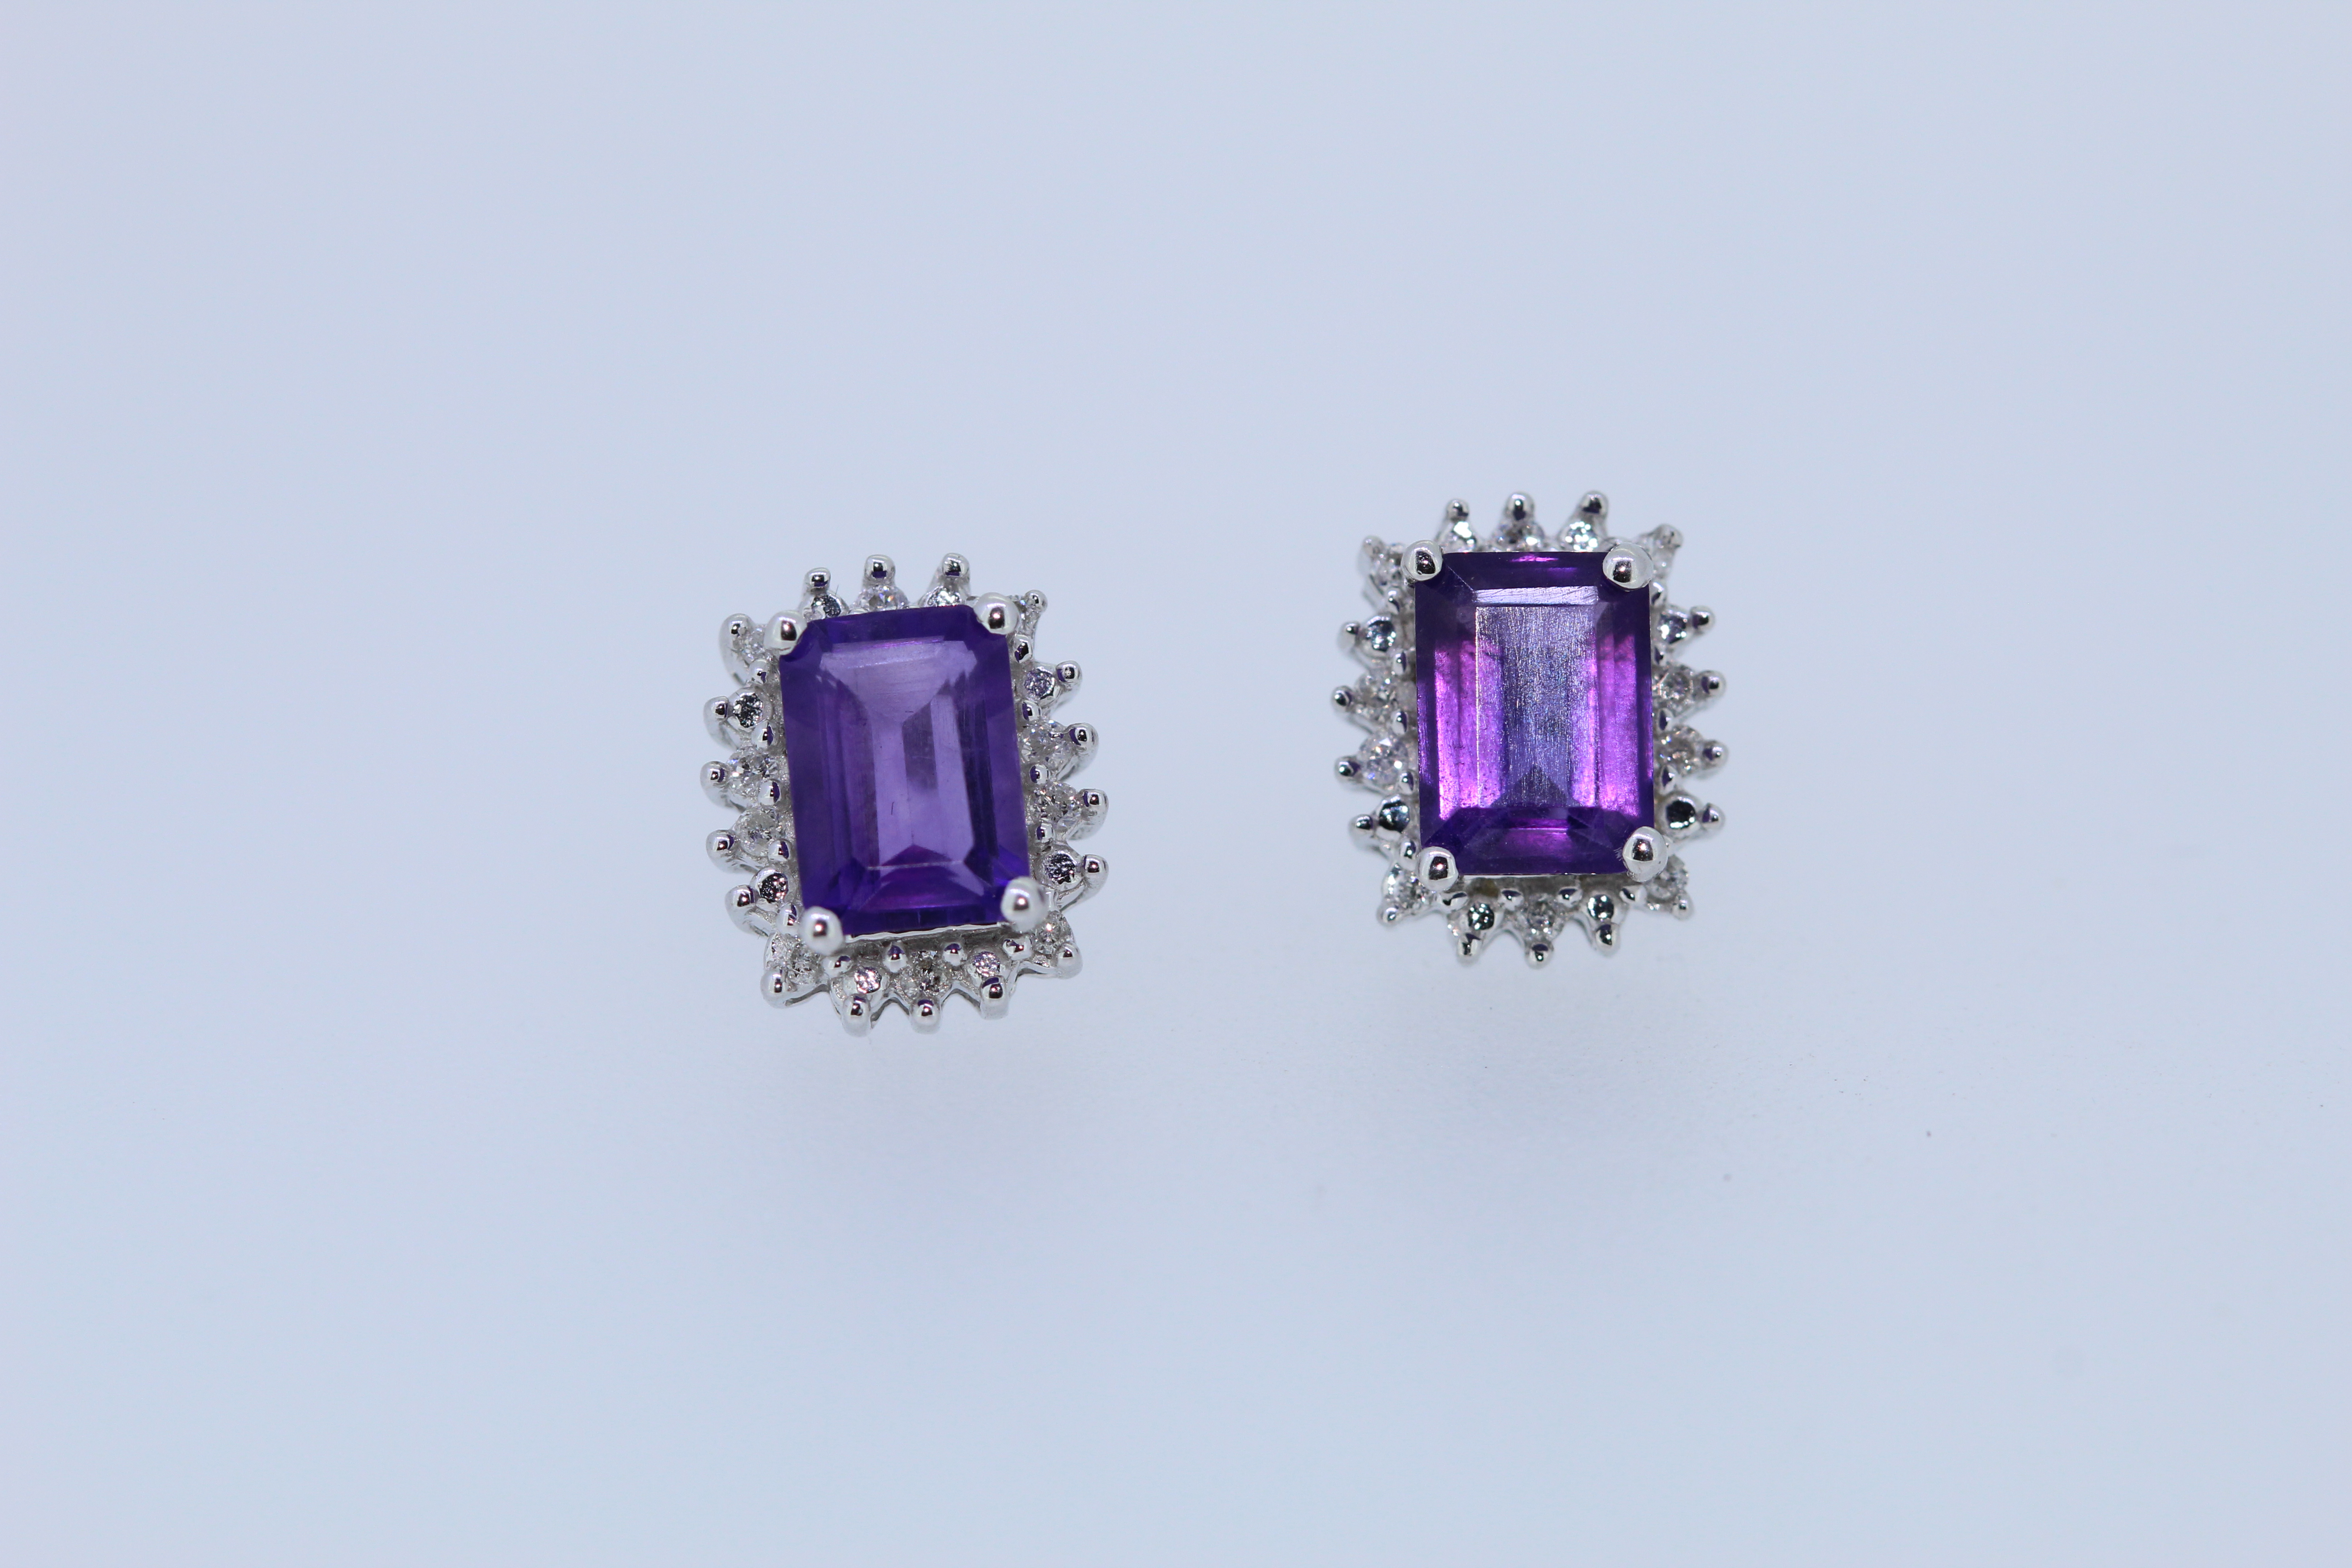 9ct White Gold Amethyst And Diamond Stud Earrings - Image 4 of 4